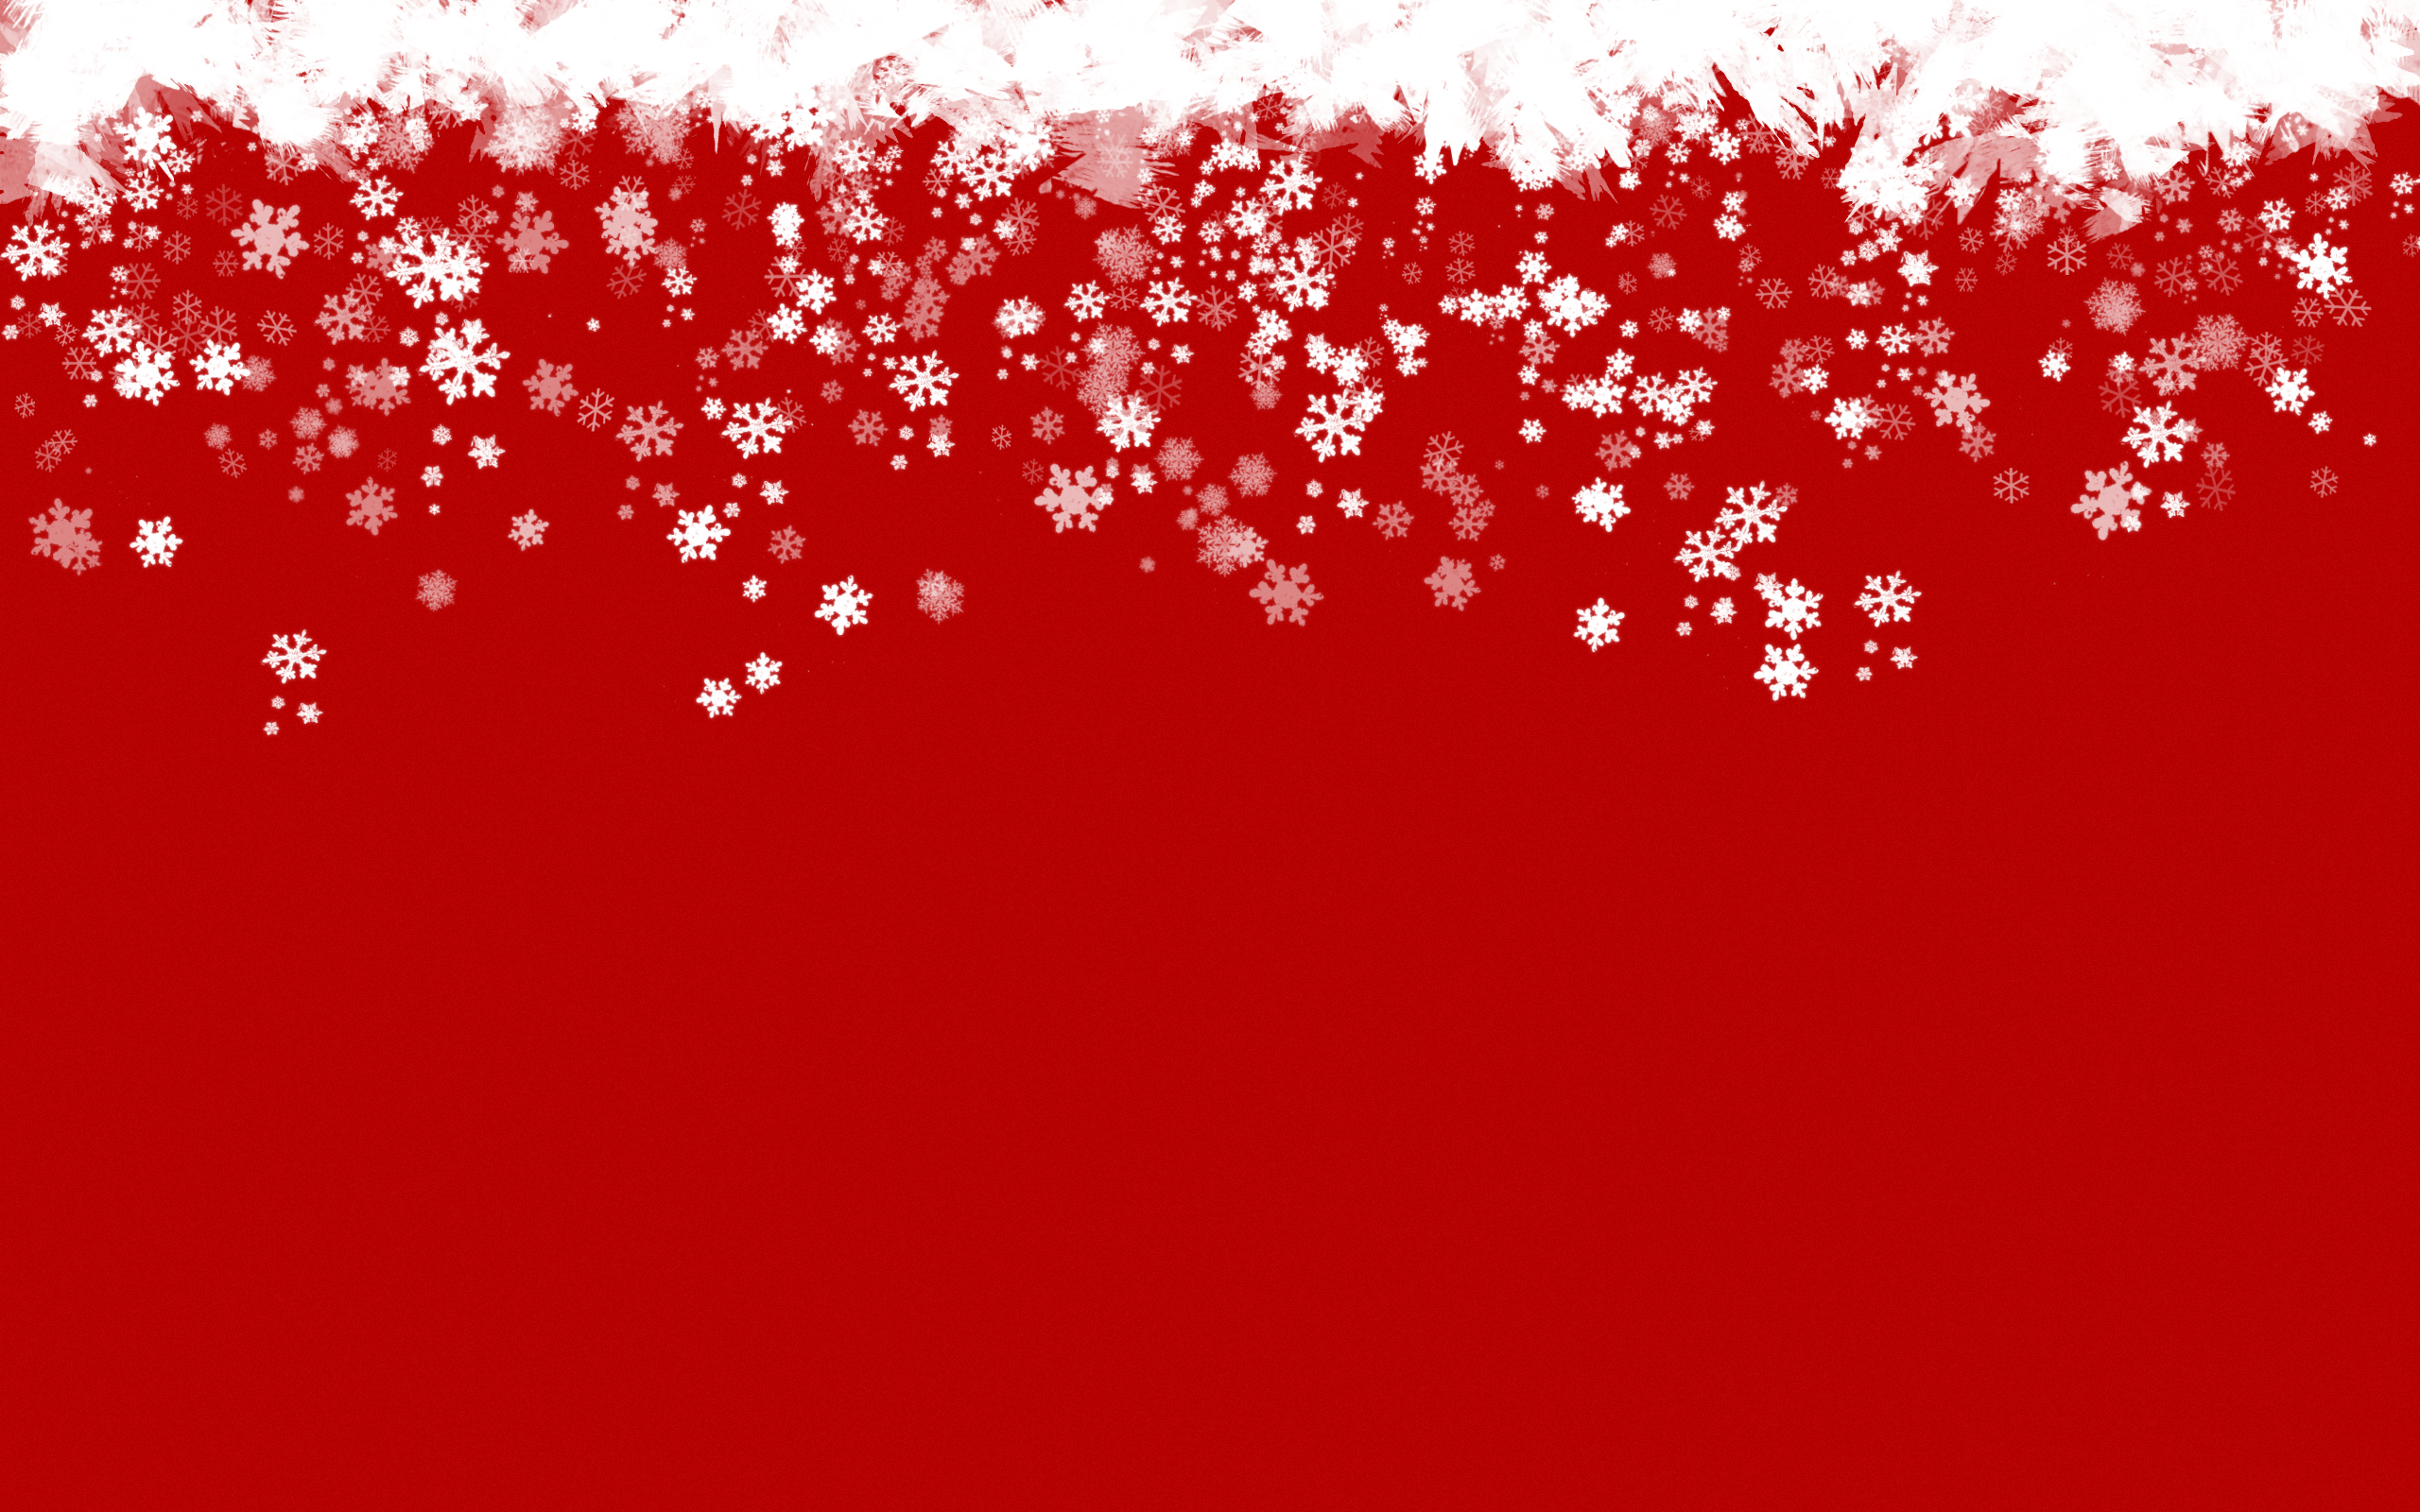 Red Snowflake Widescreen Wallpaper 49061 2560x1600 px